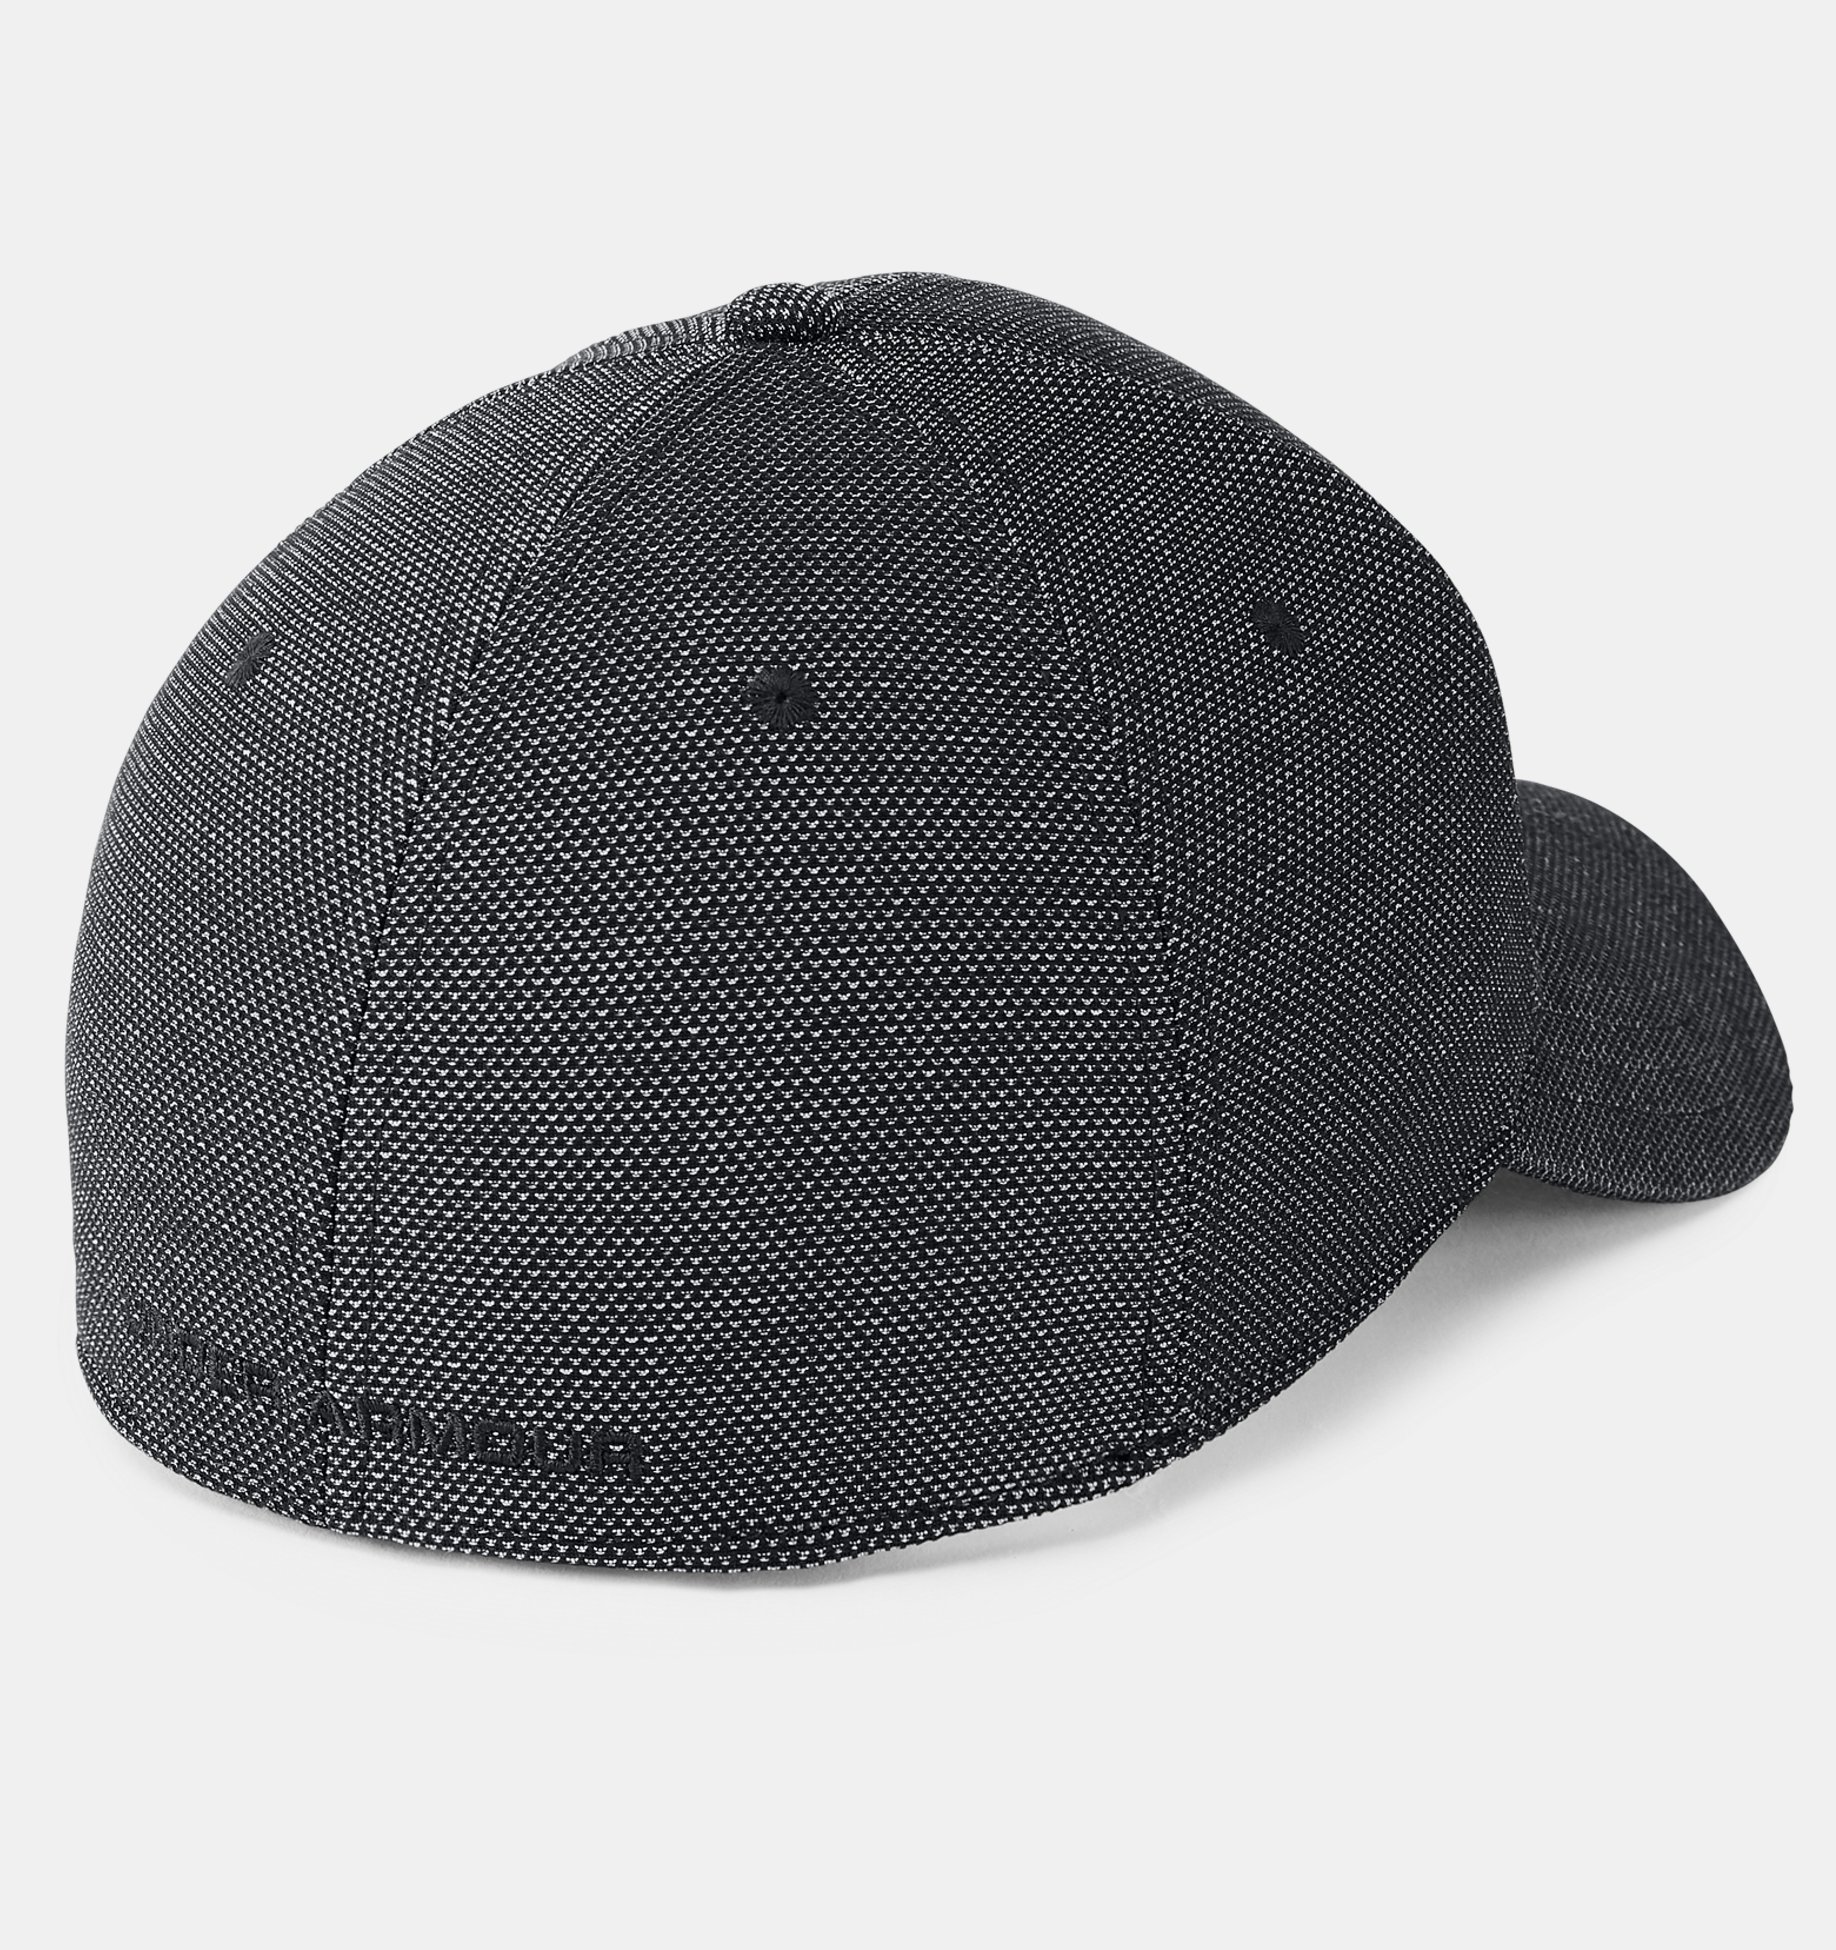 Under Armour Mens Heathered Blitzing 3.0 Cap